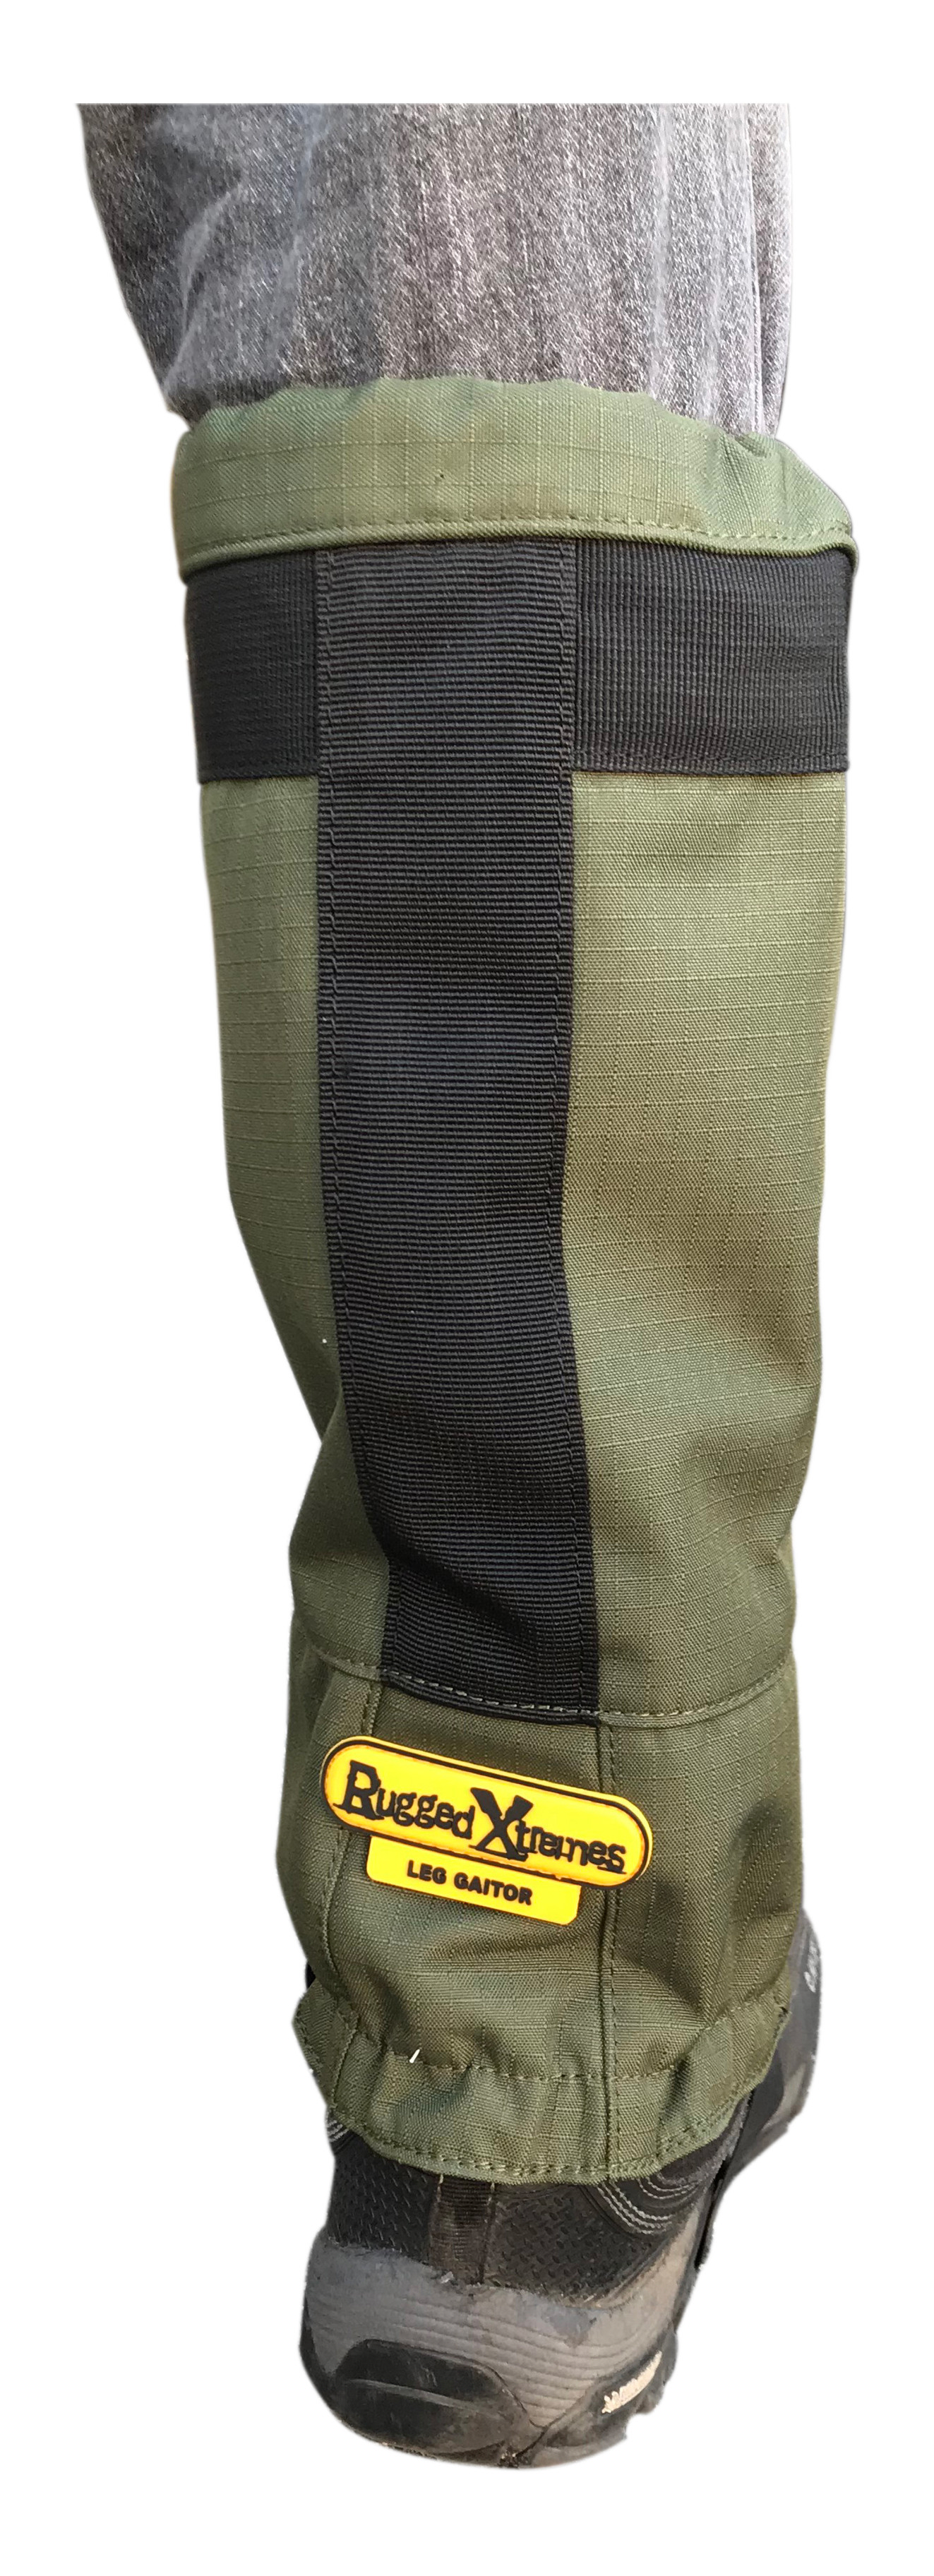 Purchase Rugged Xtremes Canvas Green Leg Gaiters (RX04A305) online ...